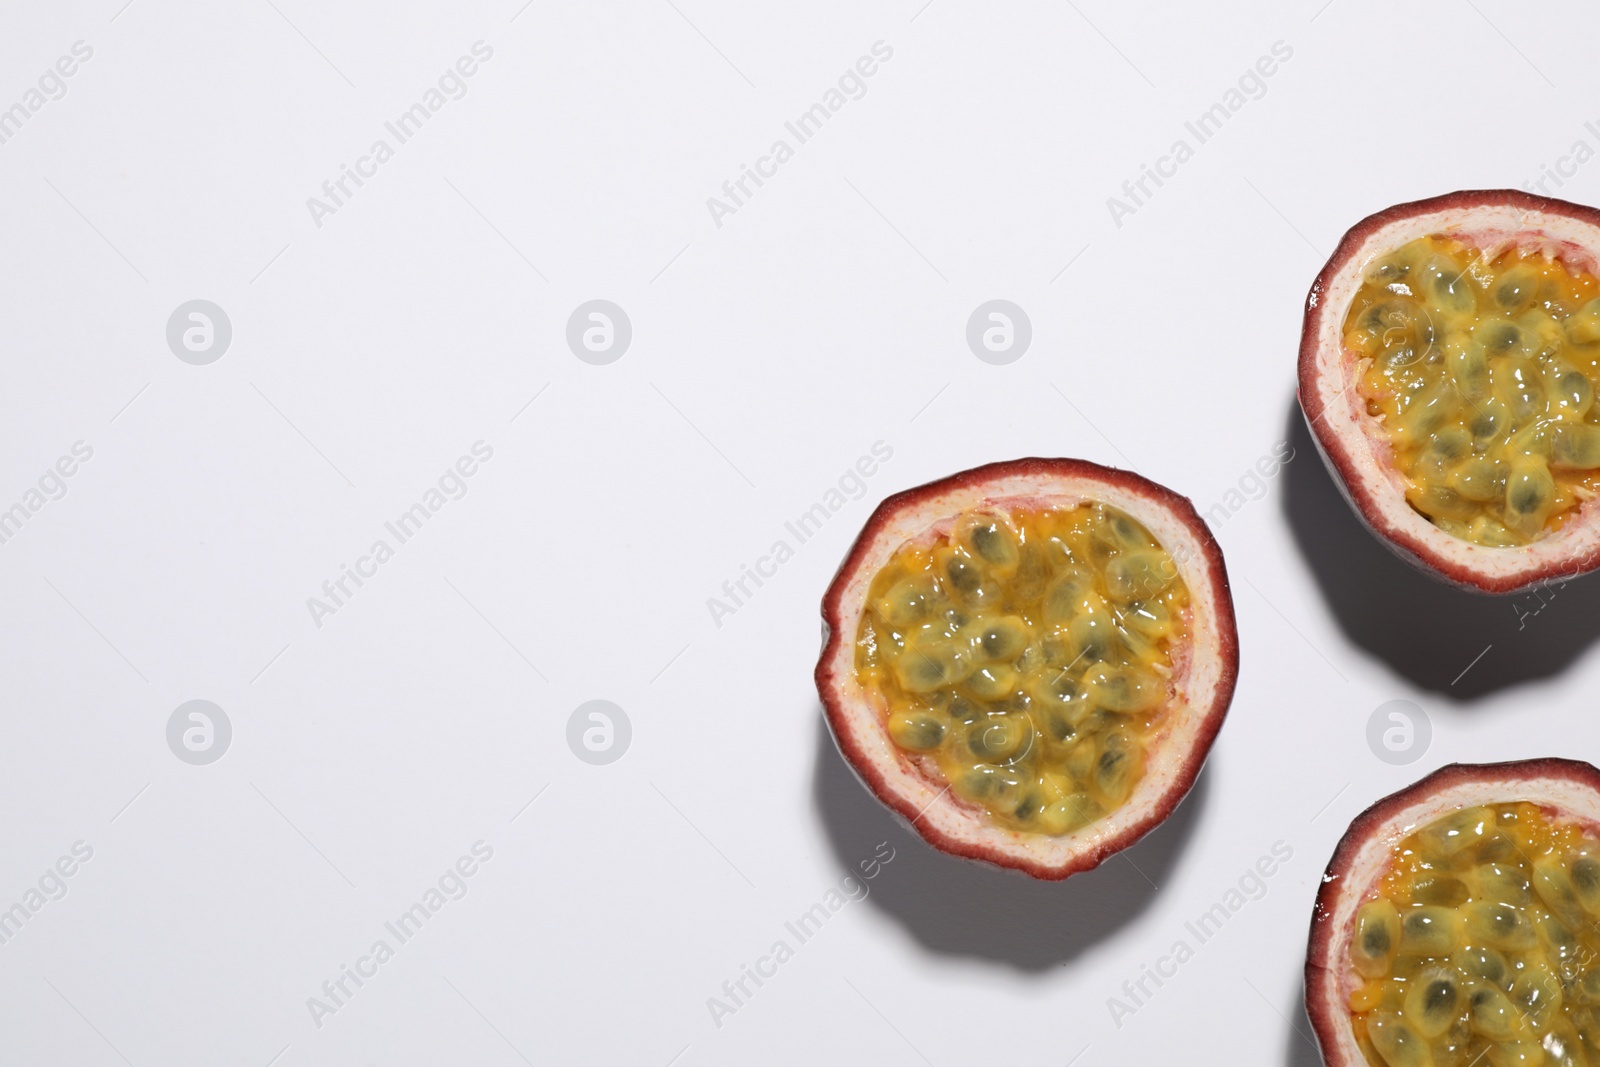 Photo of Halves of passion fruits (maracuyas) on white background, flat lay. Space for text